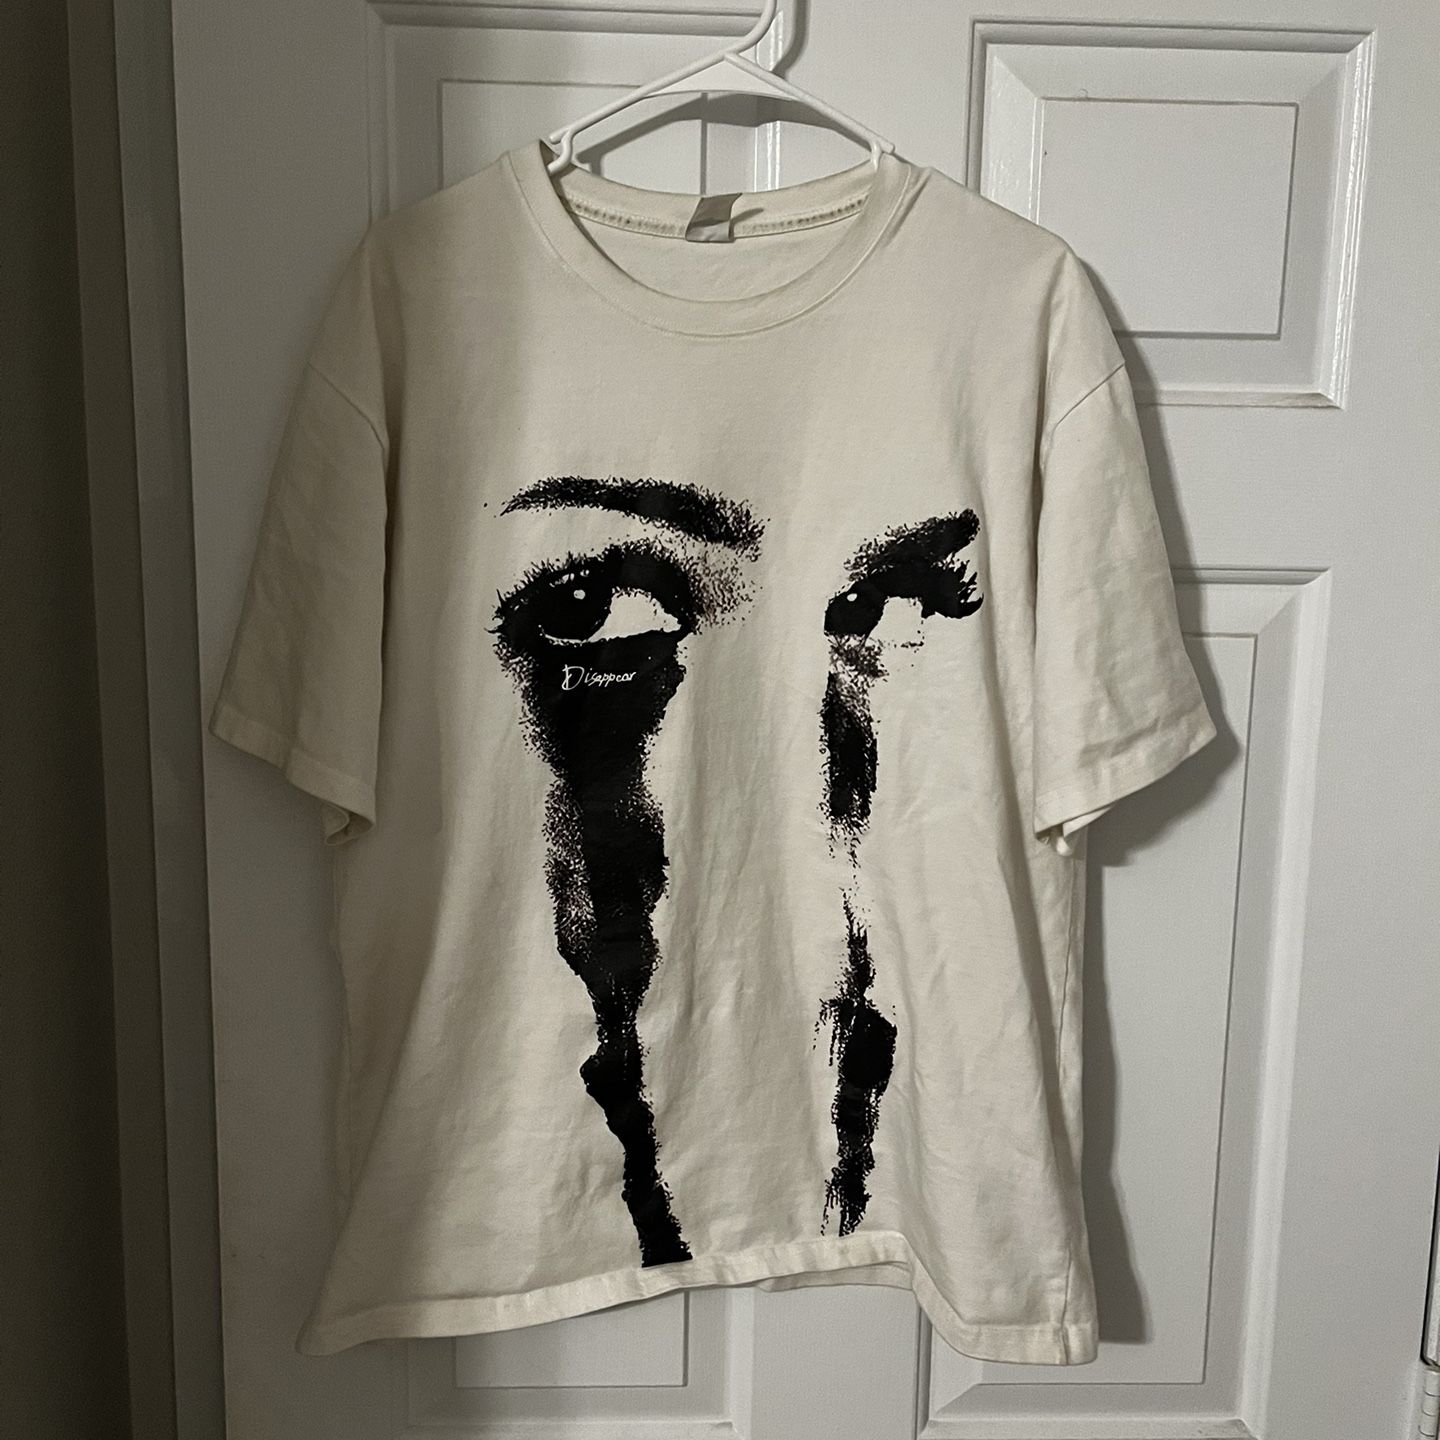  Disappear Tee